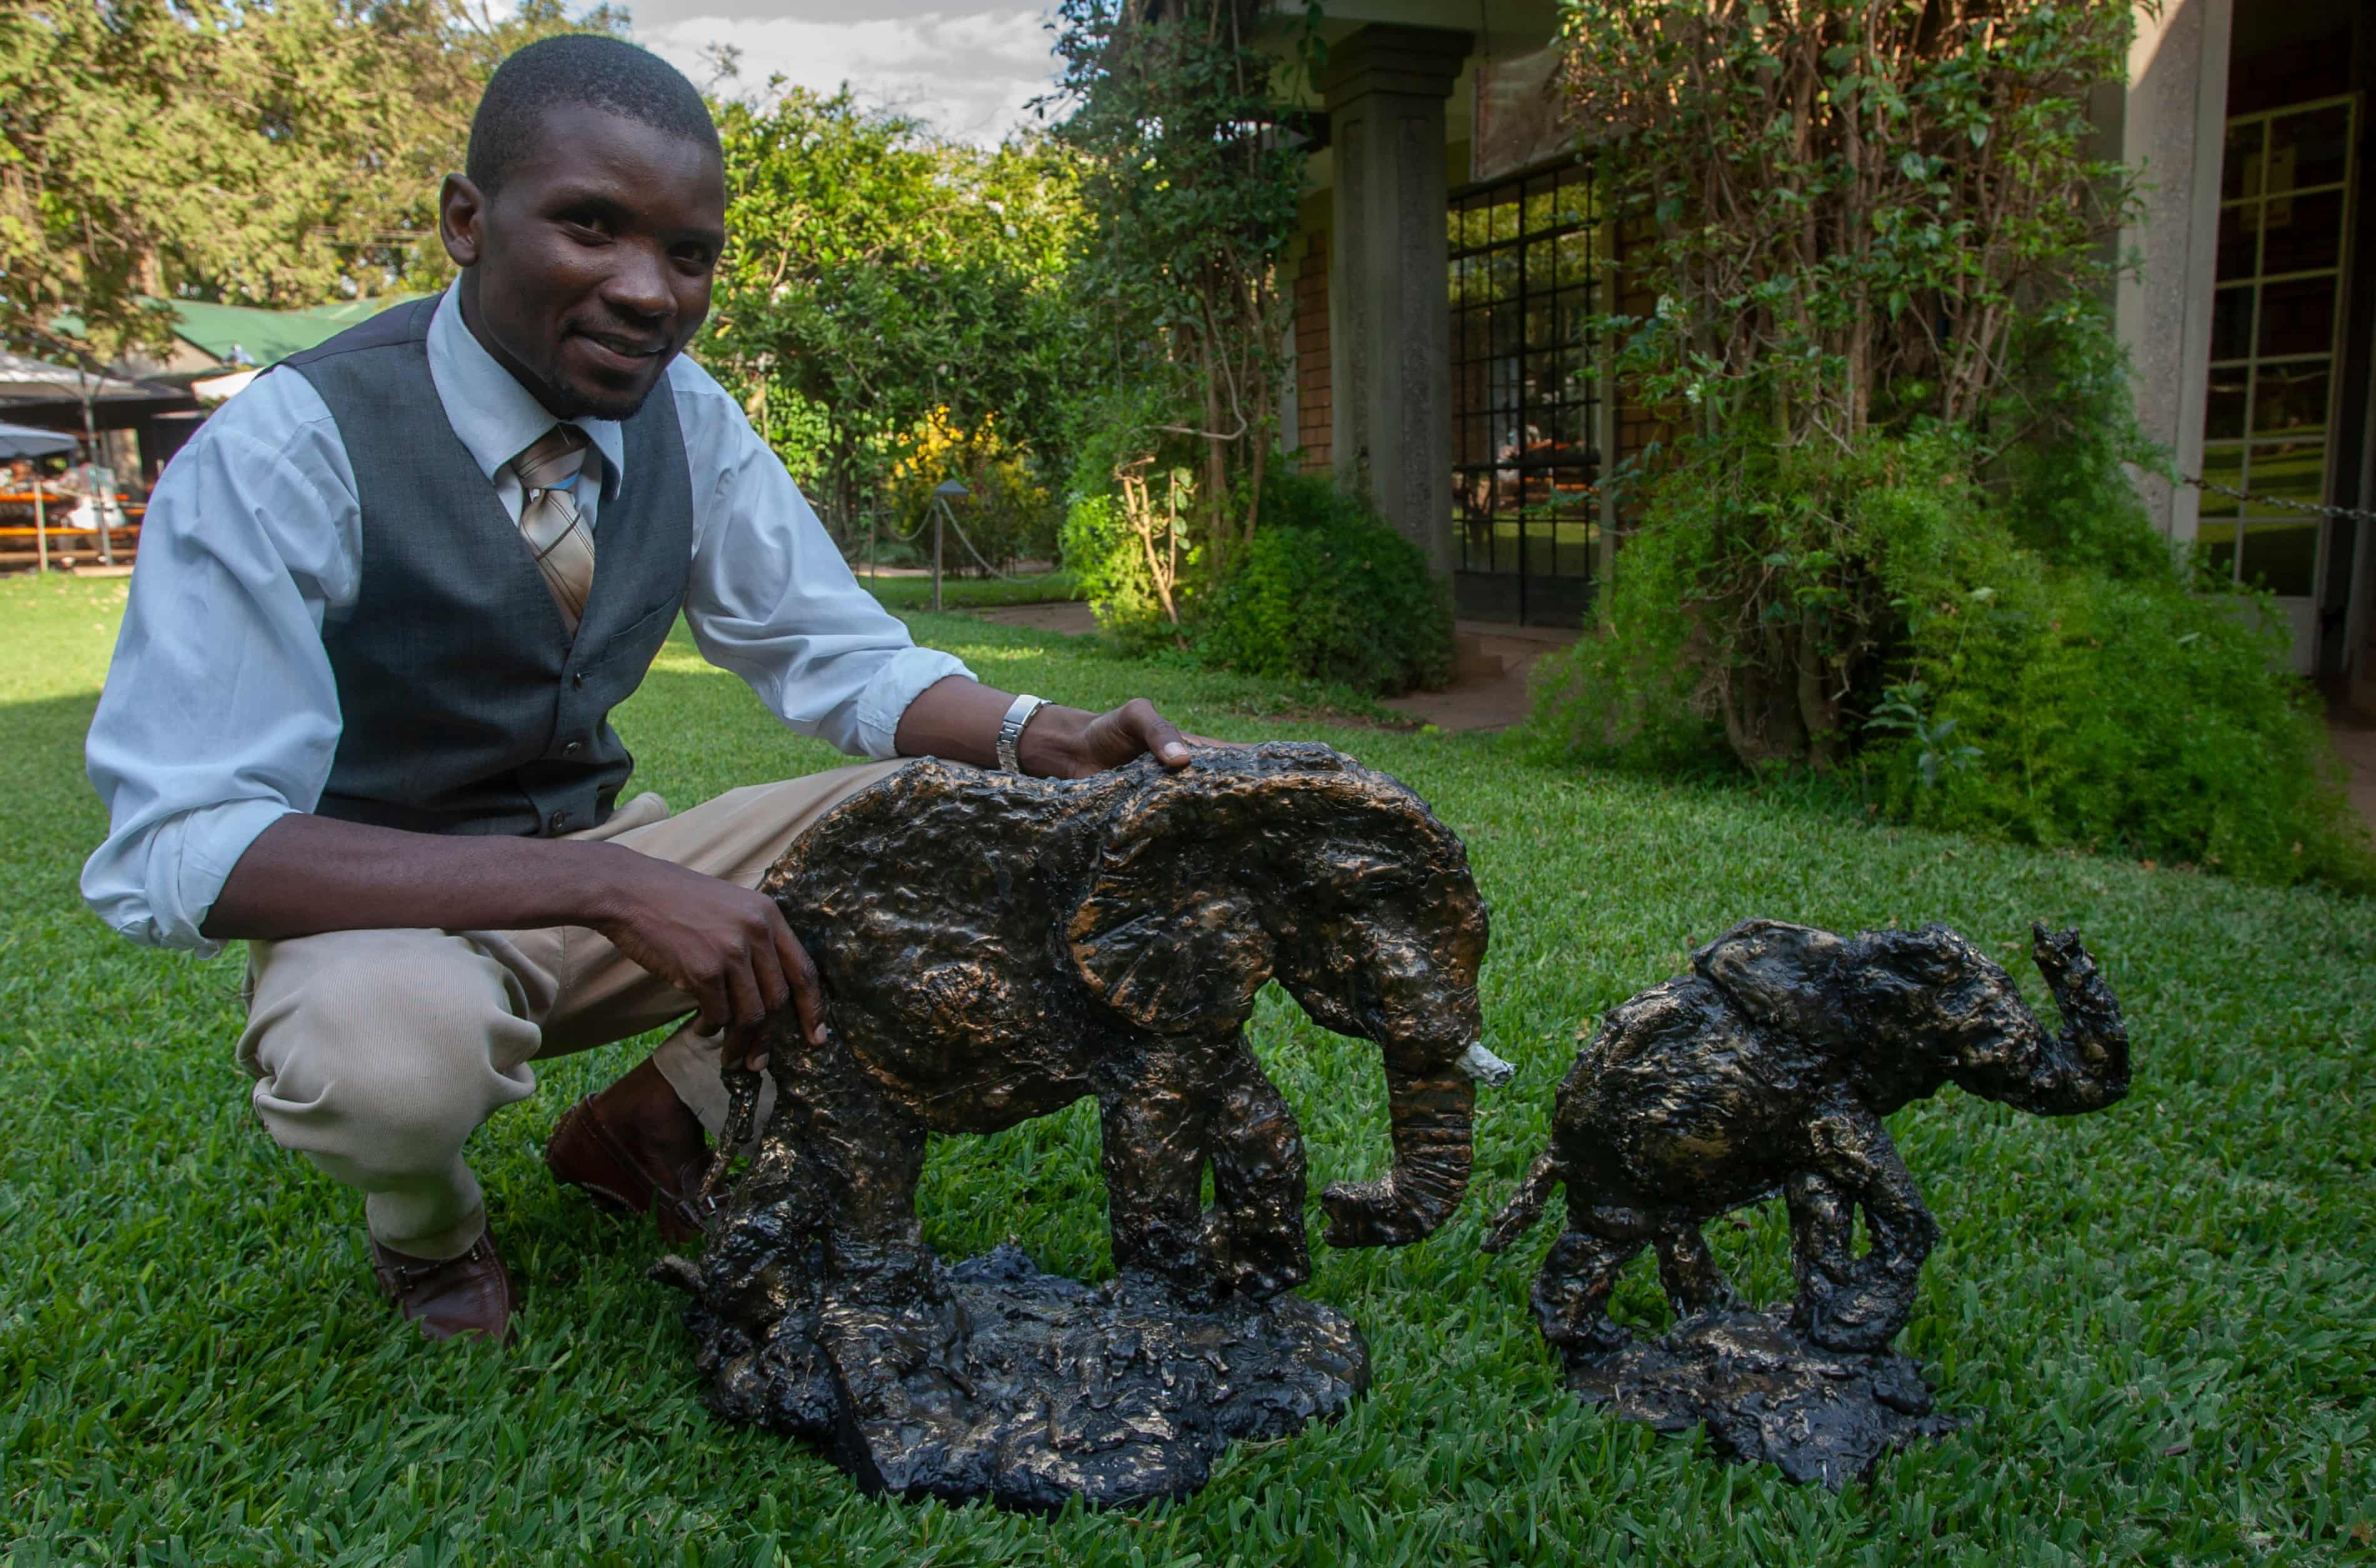 Artist Chisomo Lifa with some of the elephant sculptures he makes from recycled plastic. Photograph: Amos Gumulira/The Guardian